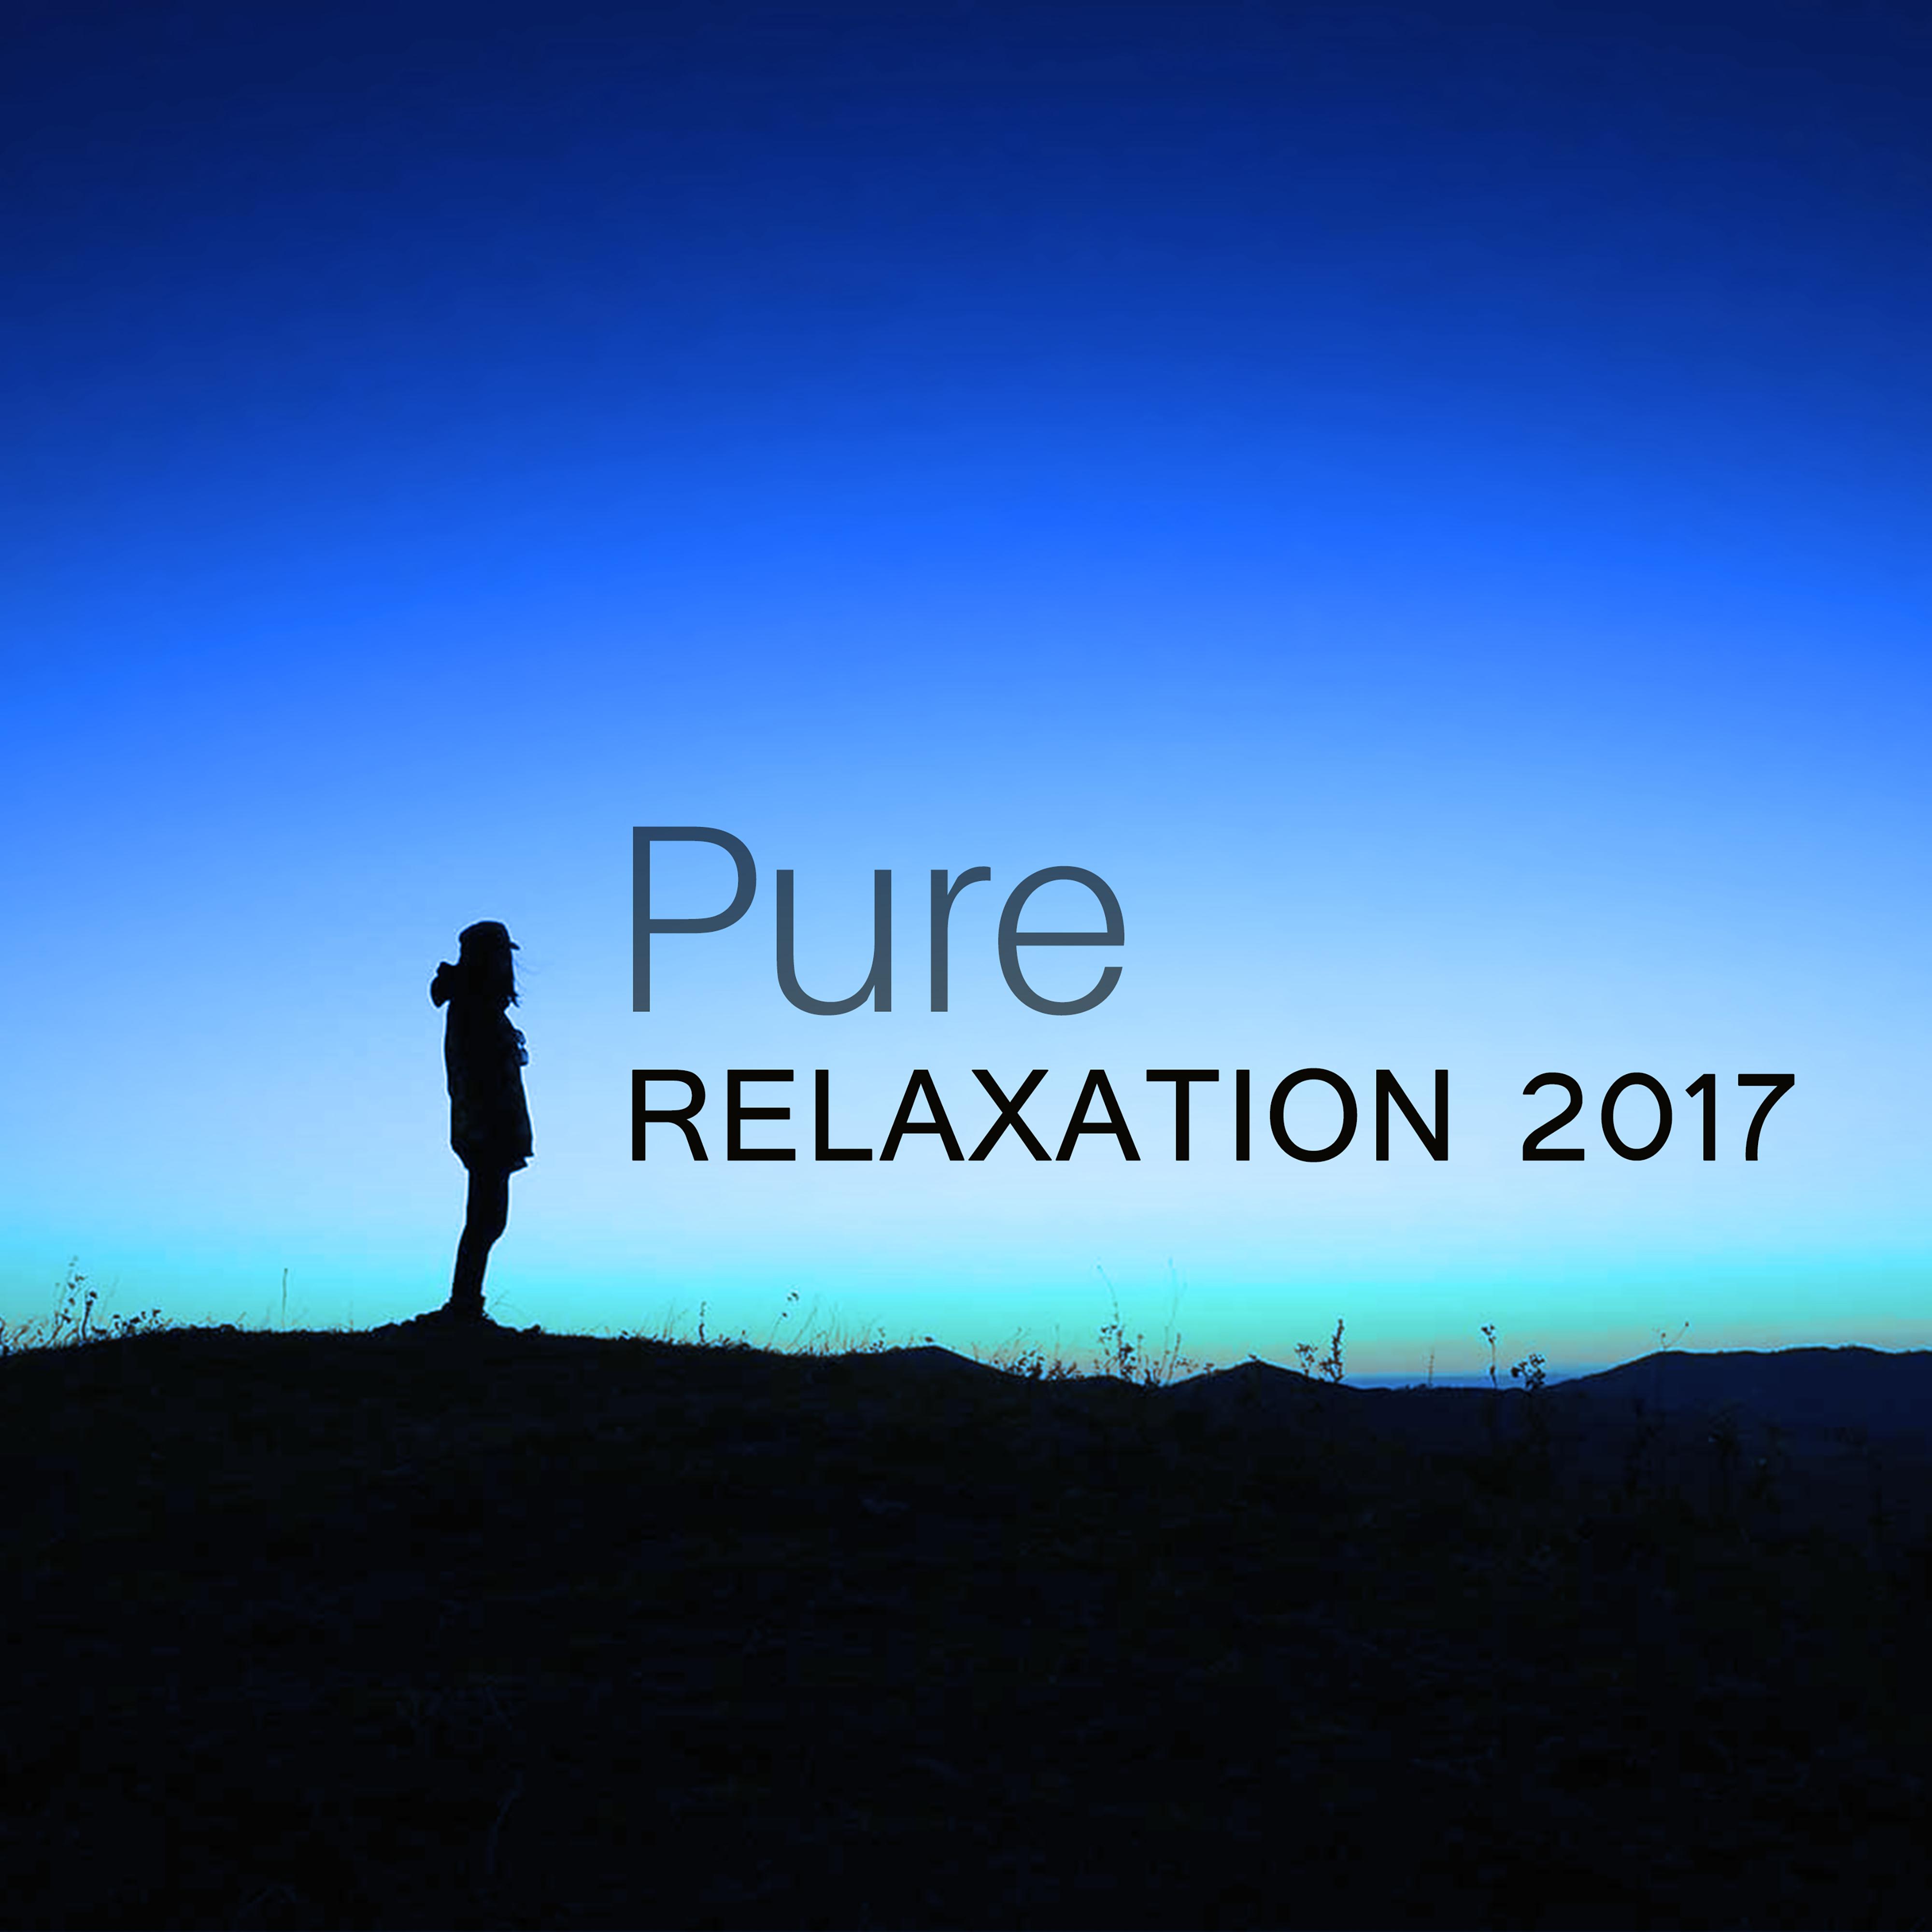 Pure Relaxation 2017 – New Age Music, Deep Relaxation, Meditation, Peaceful Sounds of Nature to Calm Down, Relief Stress